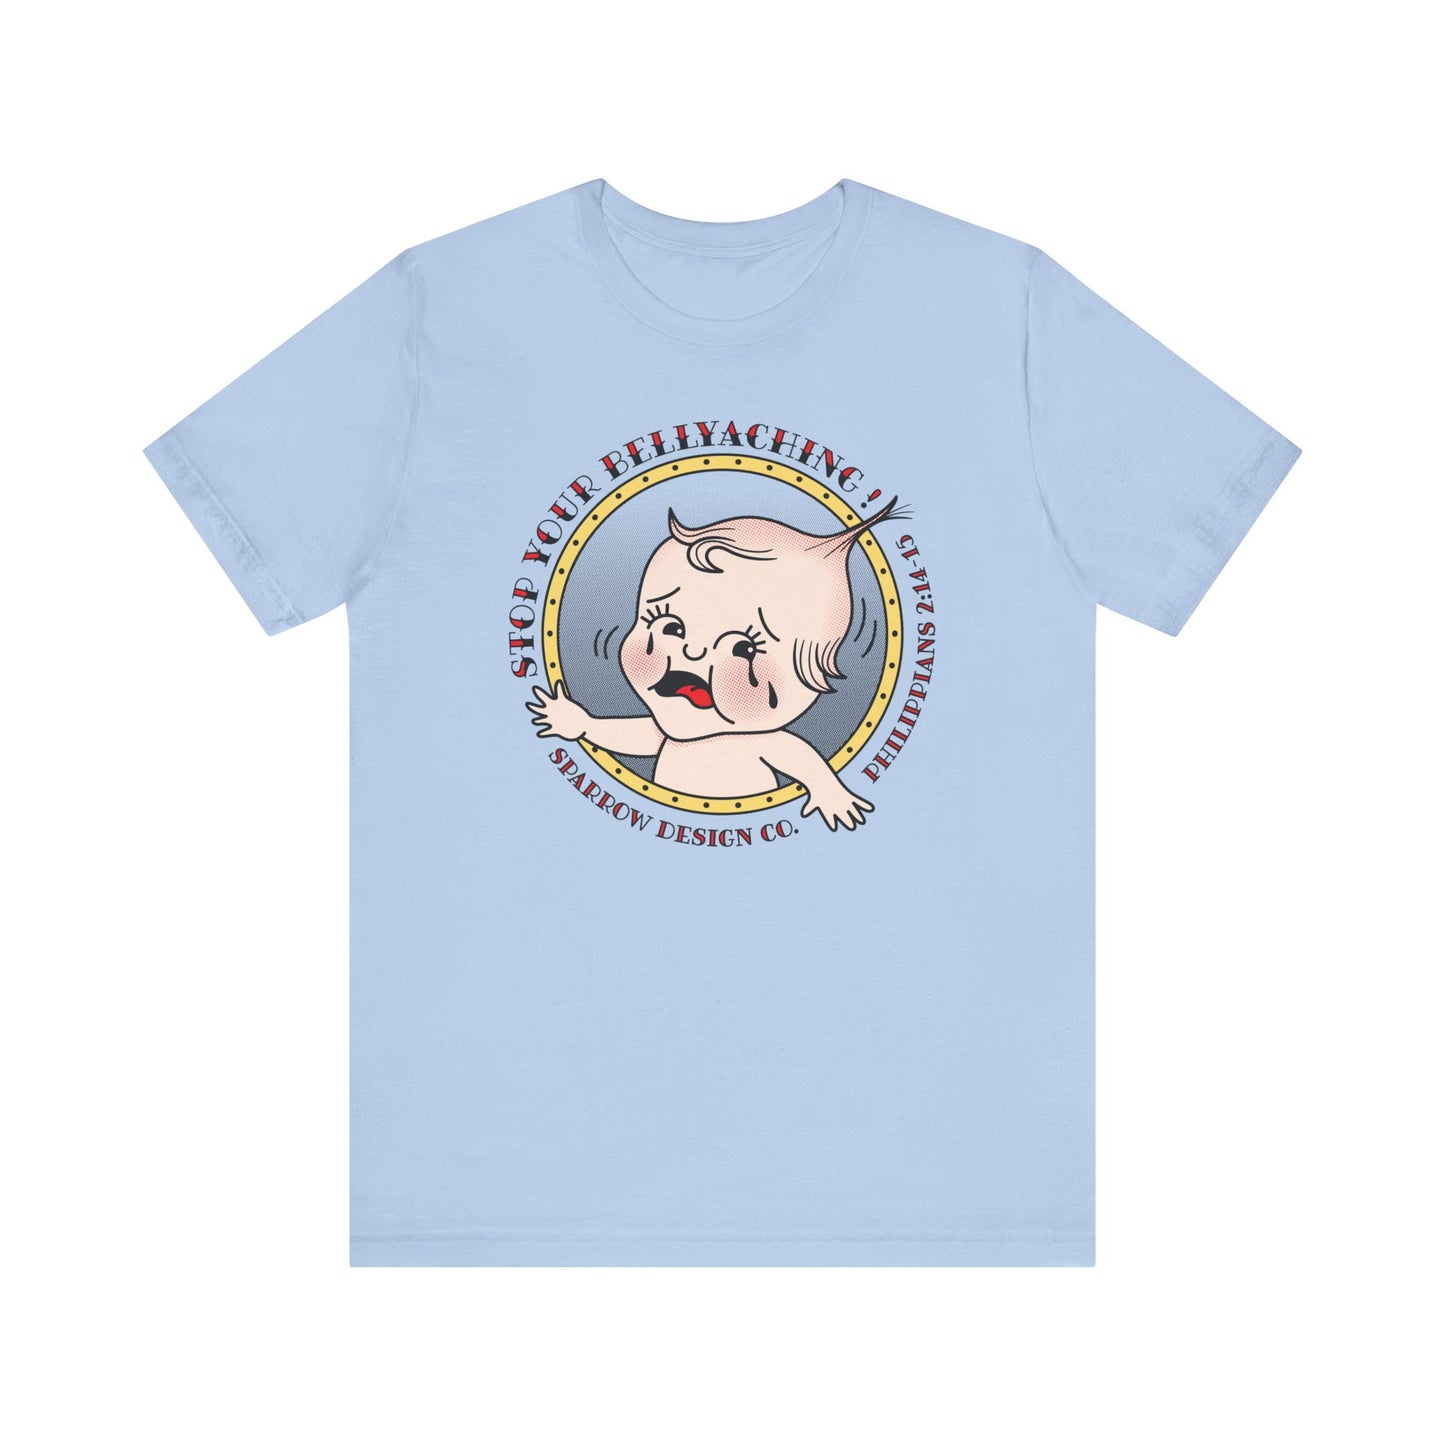 Stop Your Bellyaching Unisex Tee - Tan/Blues